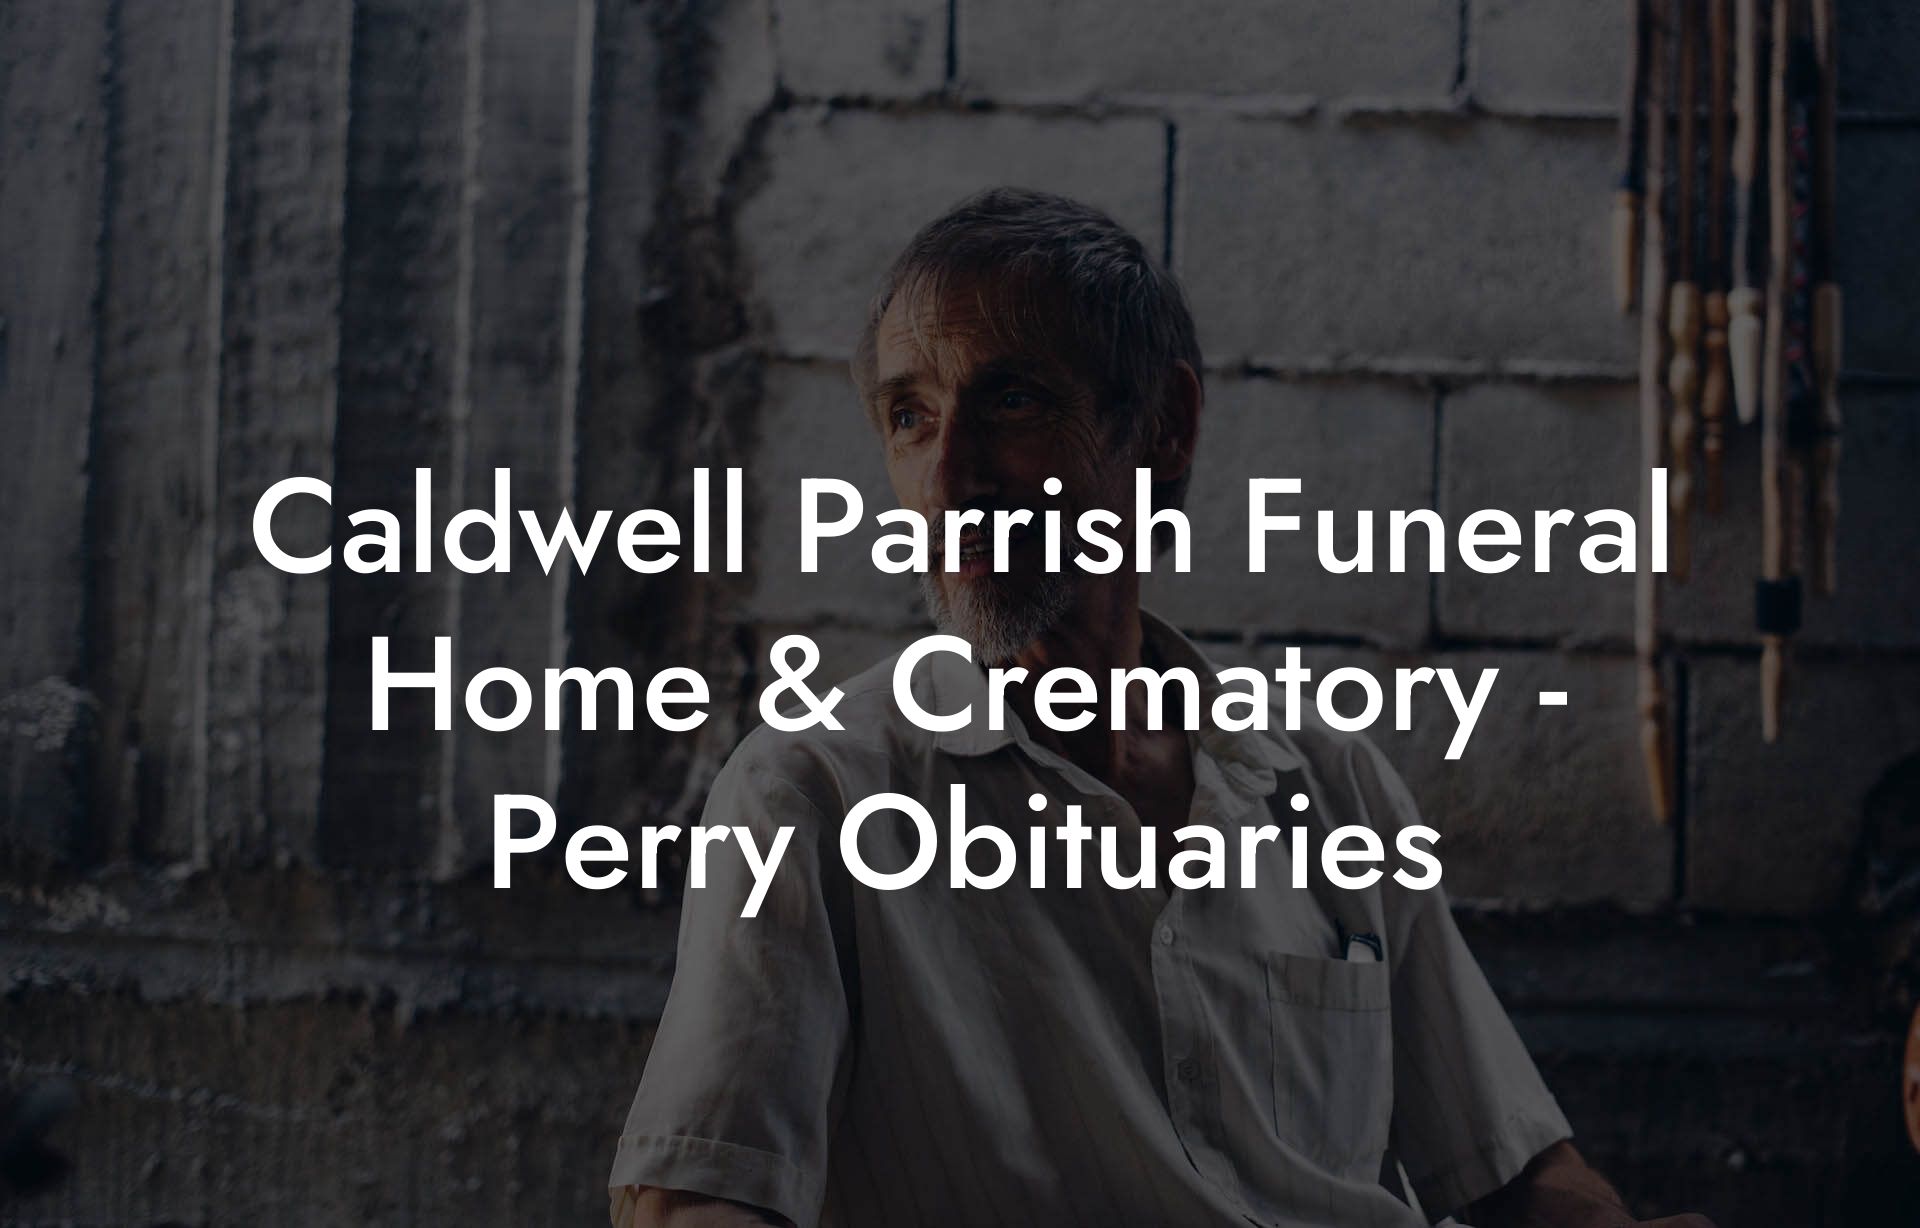 Caldwell Parrish Funeral Home & Crematory - Perry Obituaries